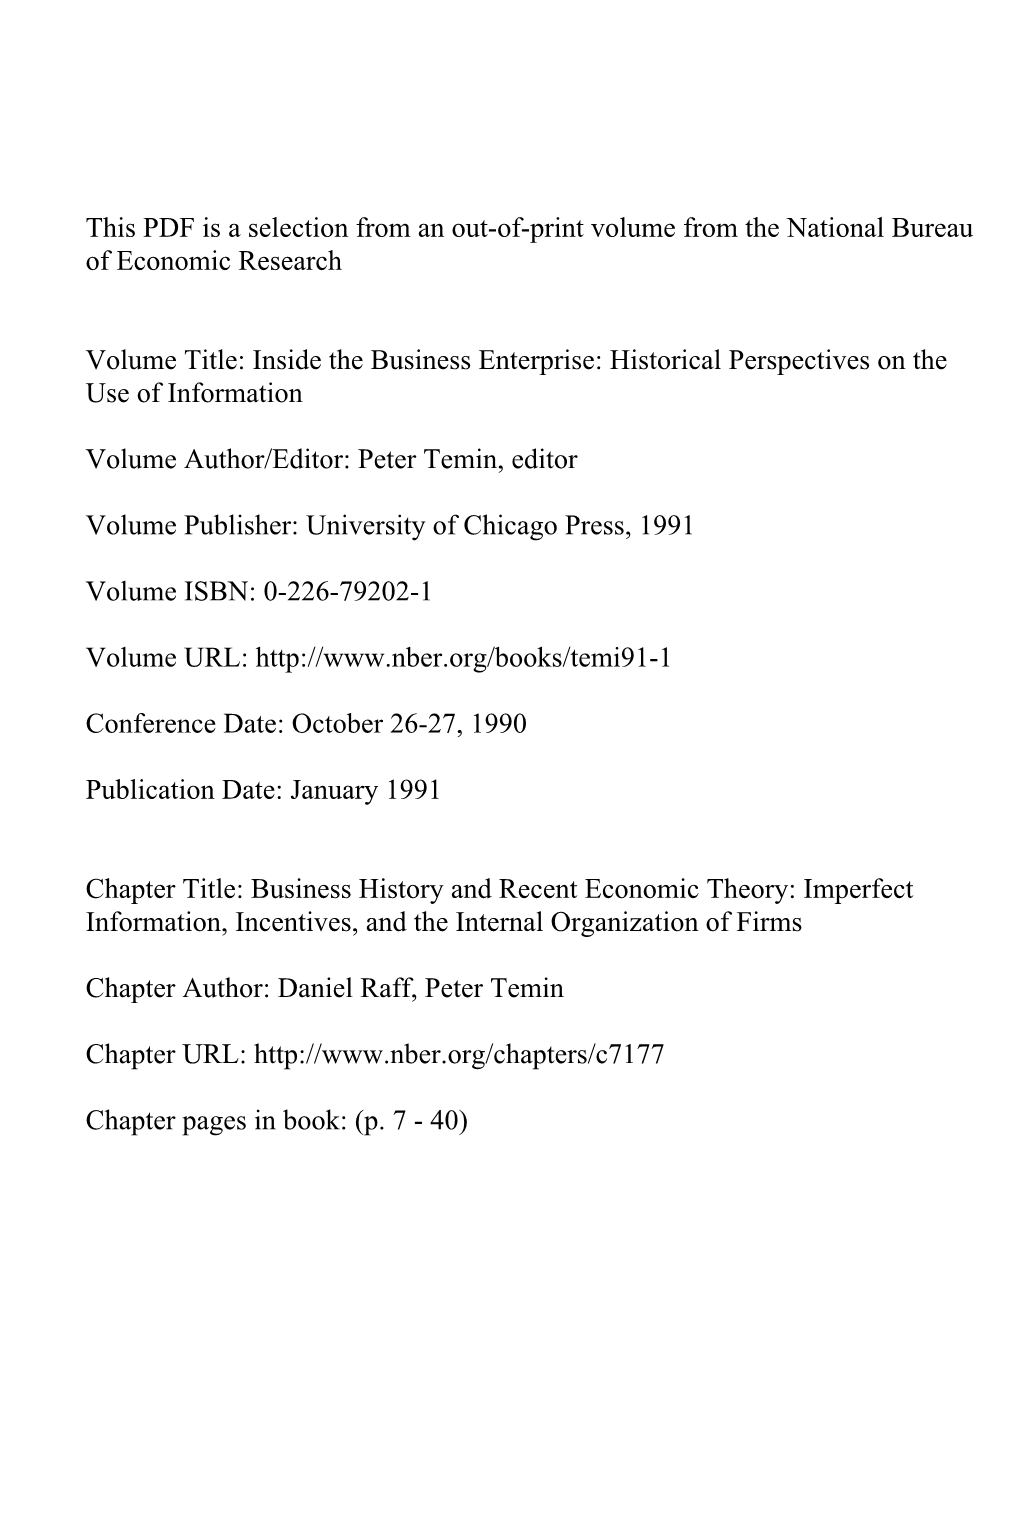 Business History and Recent Economic Theory: Imperfect Information, Incentives, and the Internal Organization of Firms